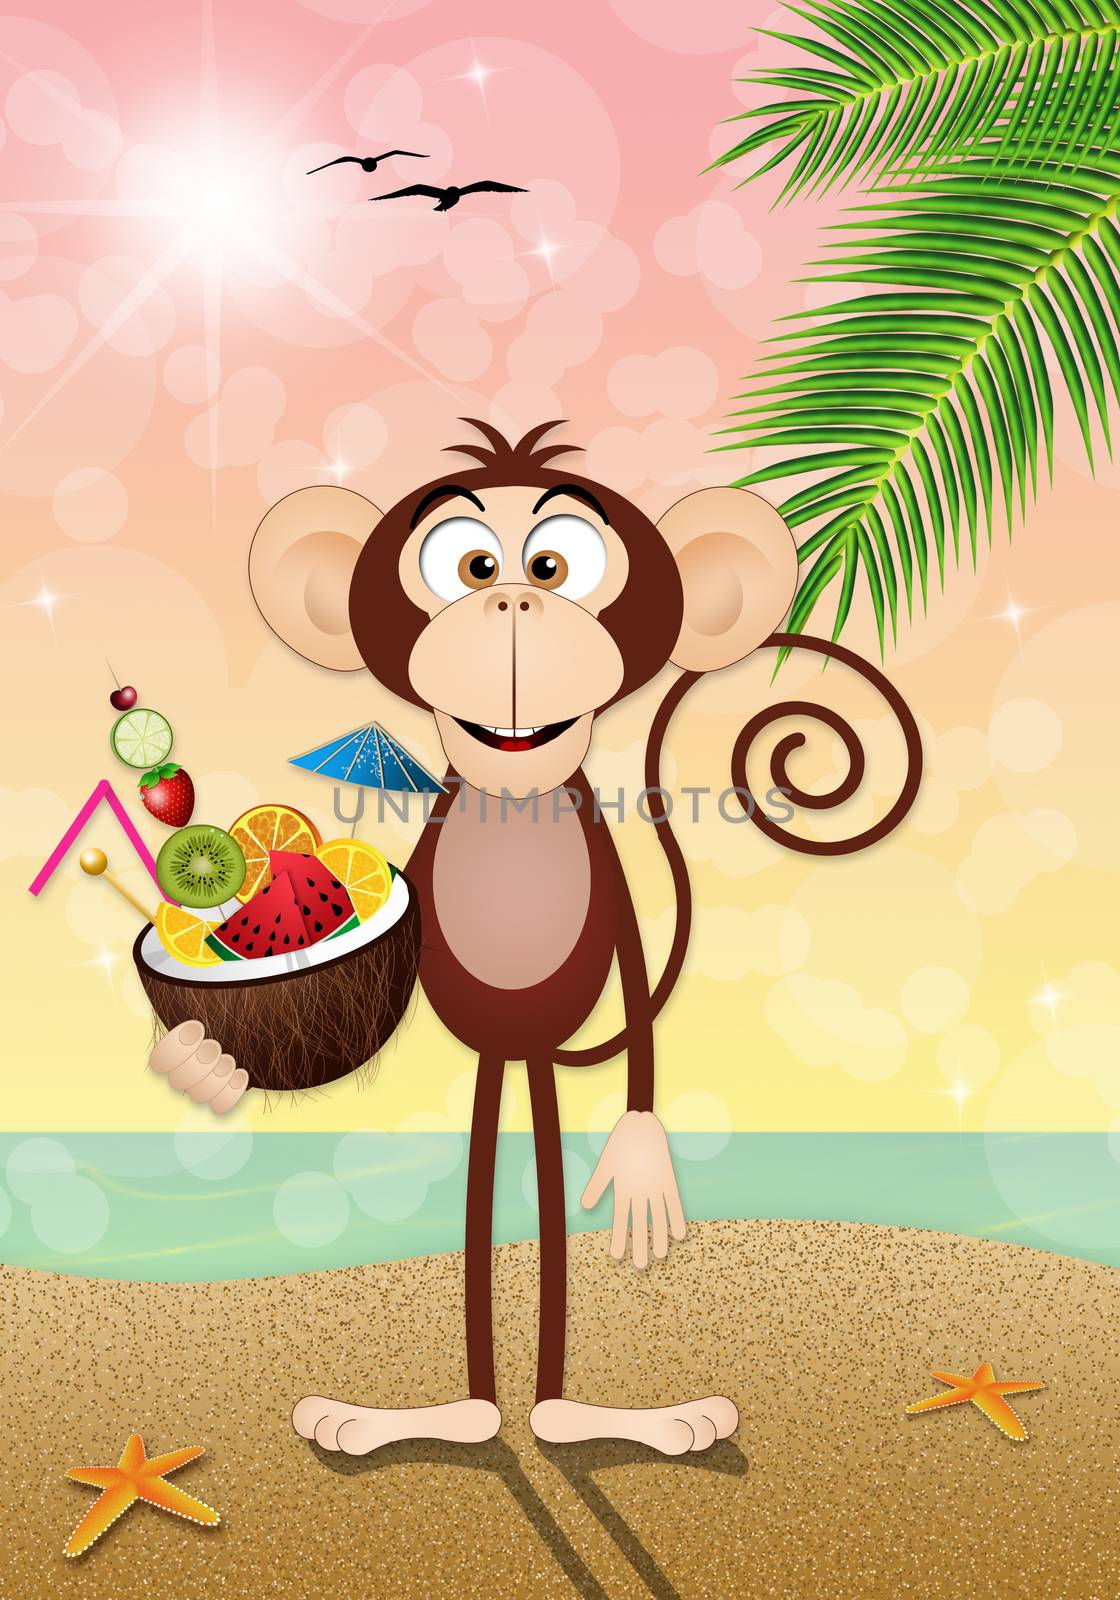 Monkey with coconut by sognolucido